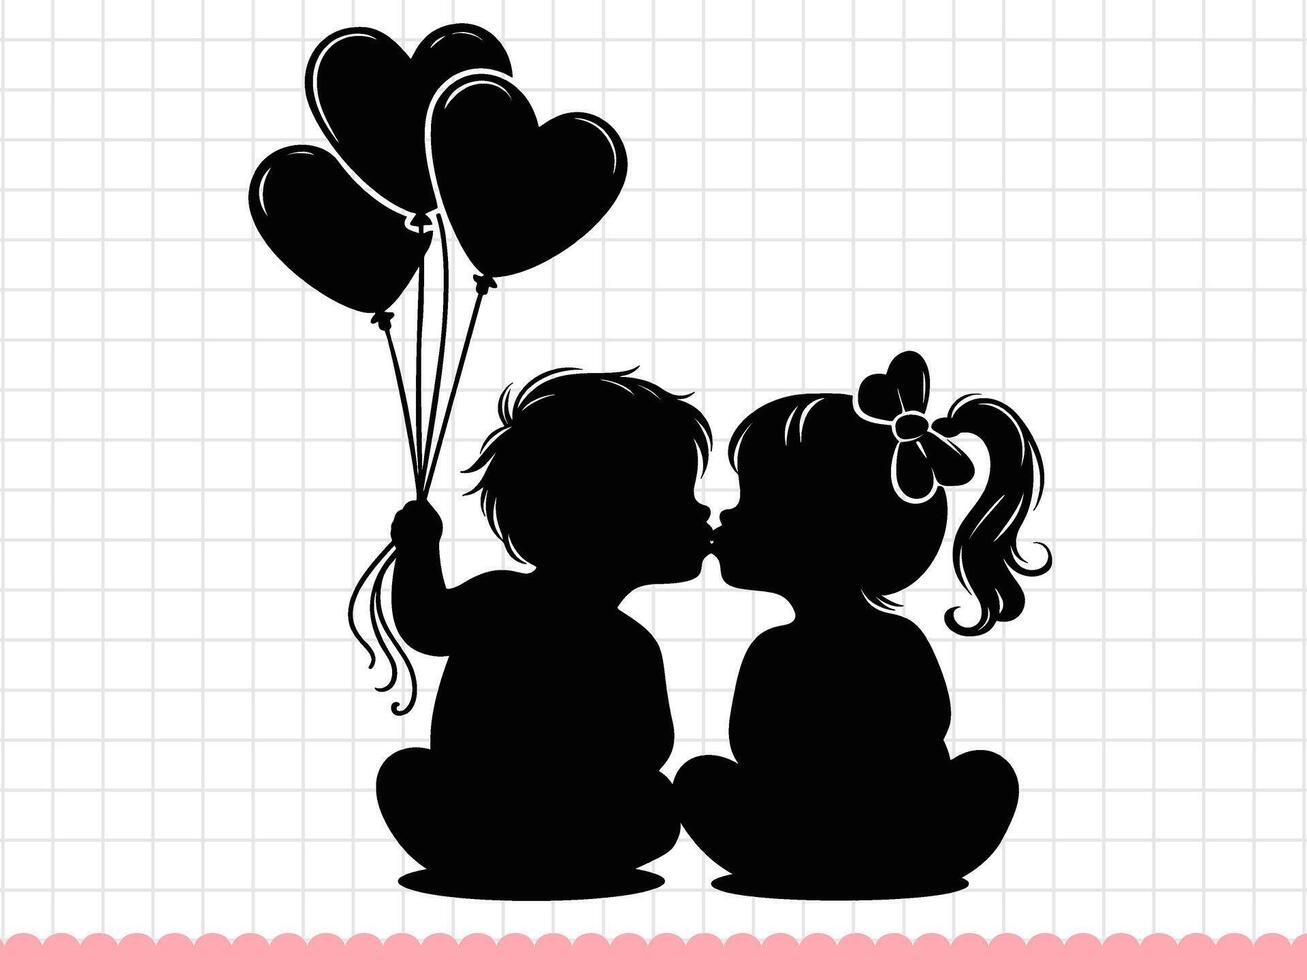 Cute baby boy and girl with heart shaped balloon. Vector illustration.